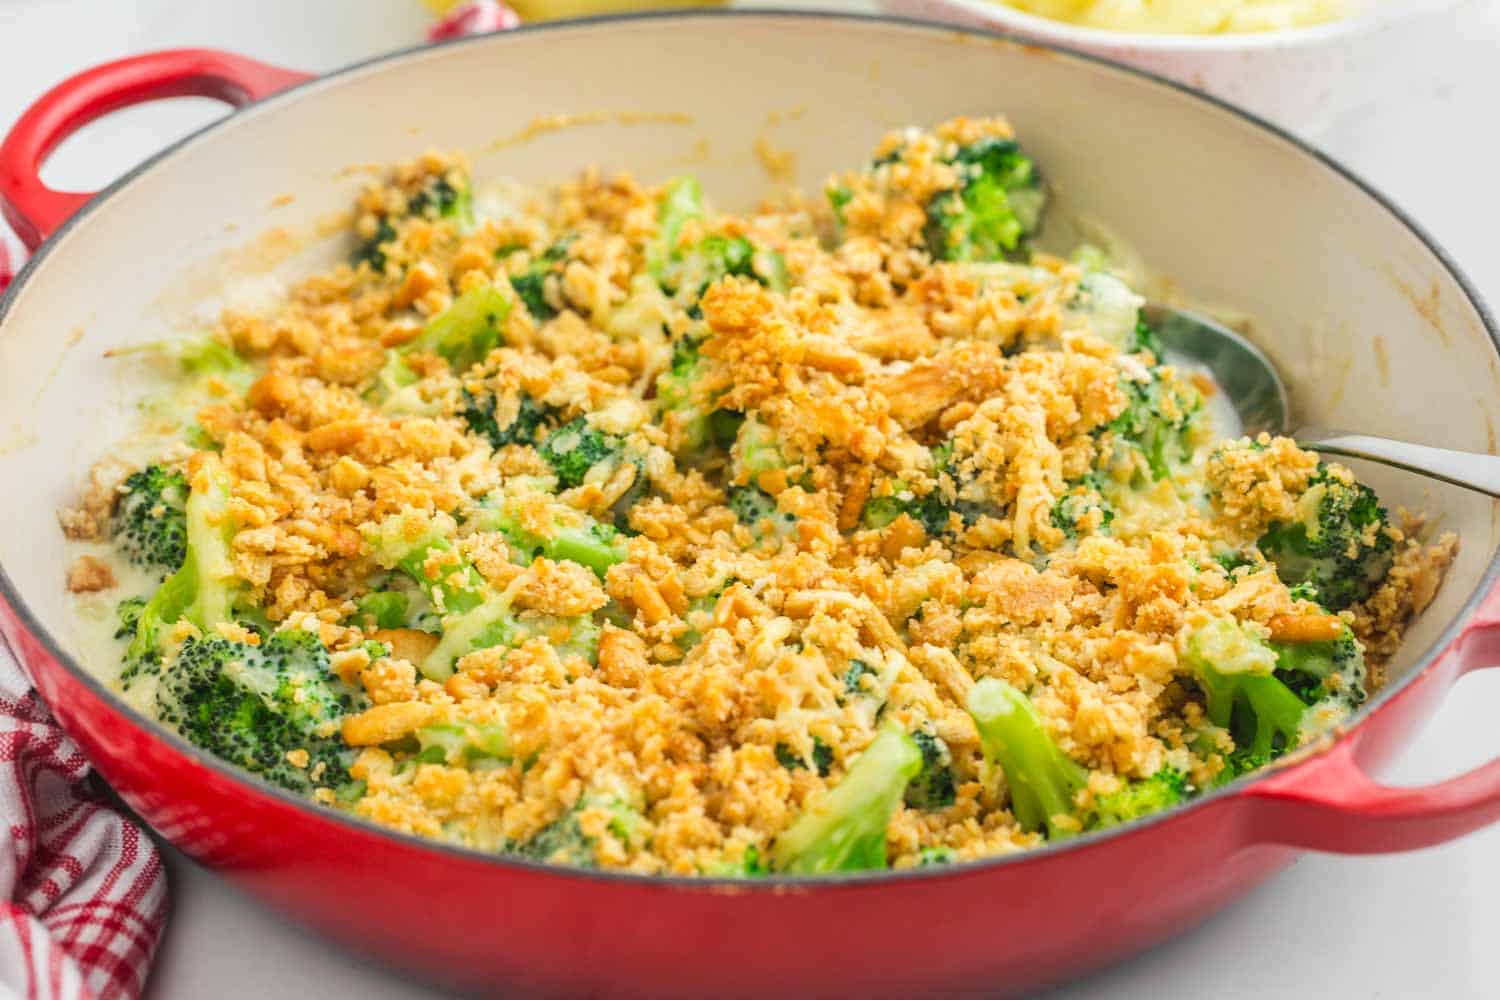 Broccoli casserole with crunchy topping in an enamelled cast iron casserole dish